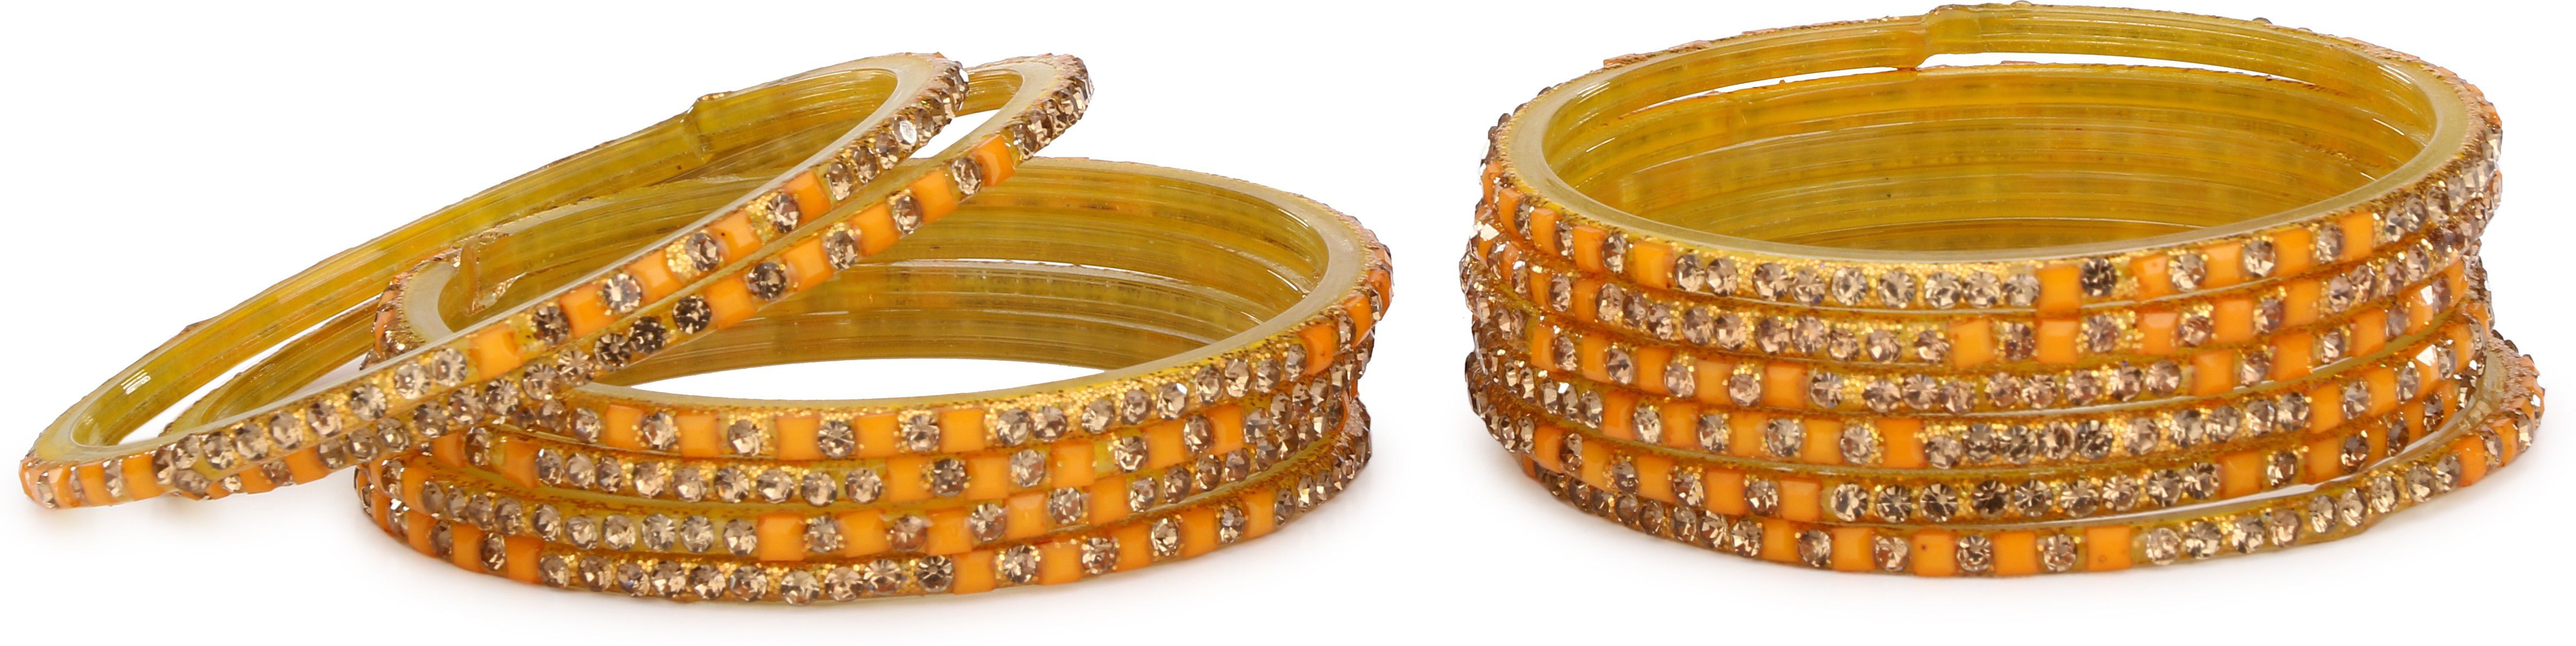     			Somil Hand Decorative Traditional/ Fashionable Glass Bangle Set Ornamented With Colorful Beads For Stylish Attractive Look (Pack Of 12) Yellow_2.8